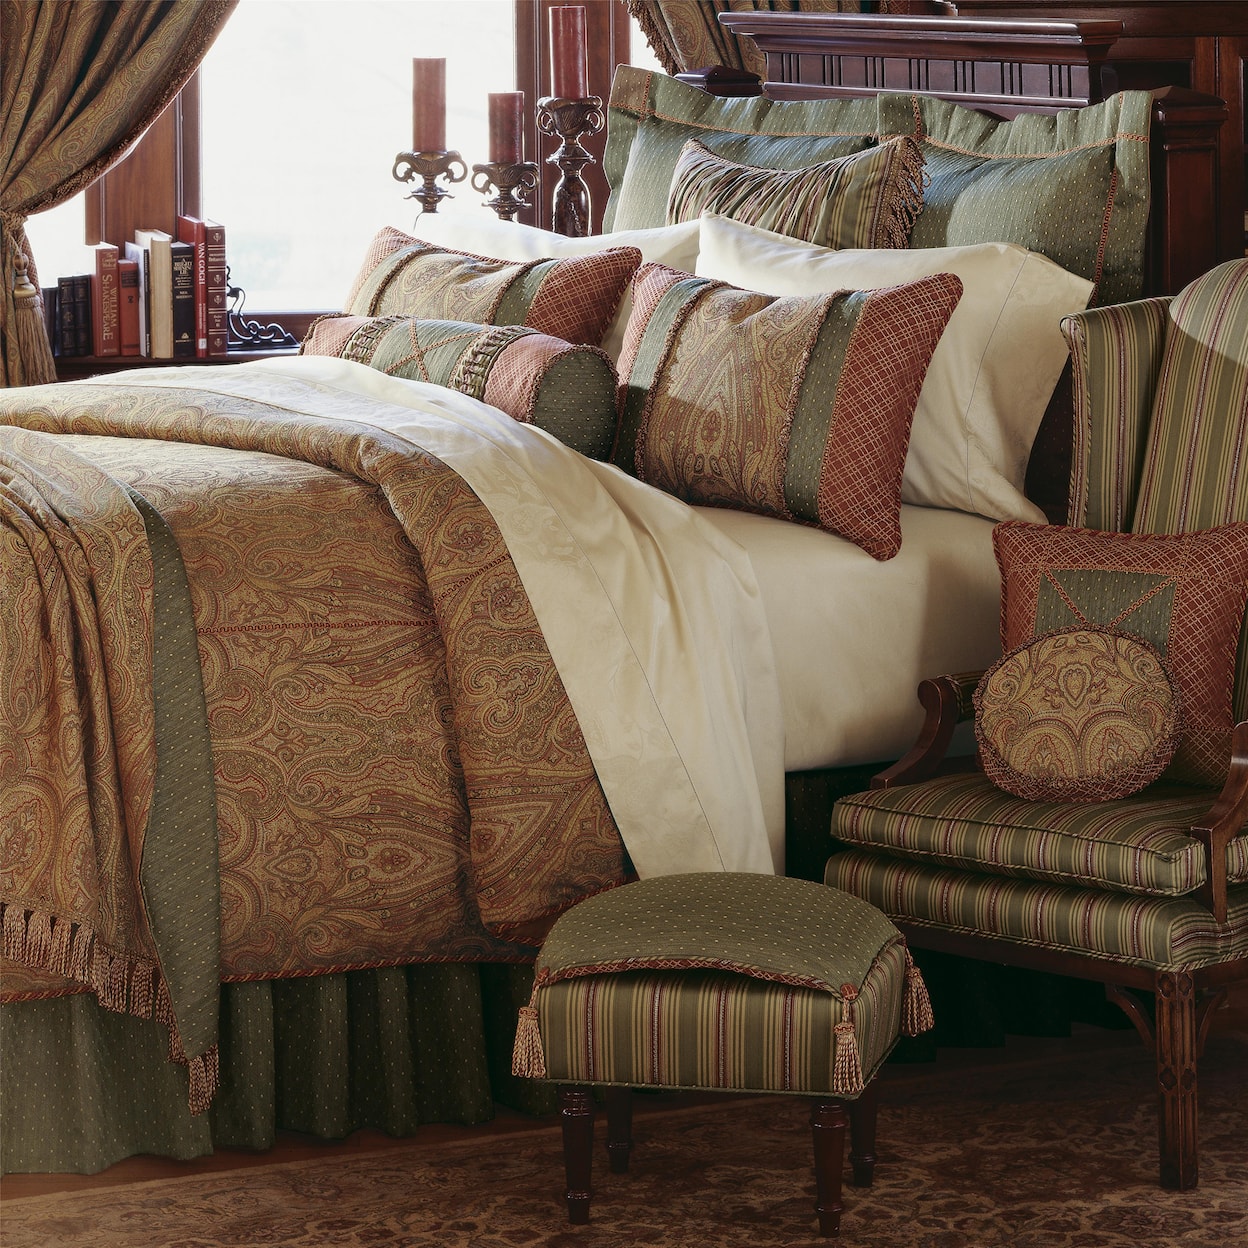 Eastern Accents Glenwood King Button-Tufted Comforter